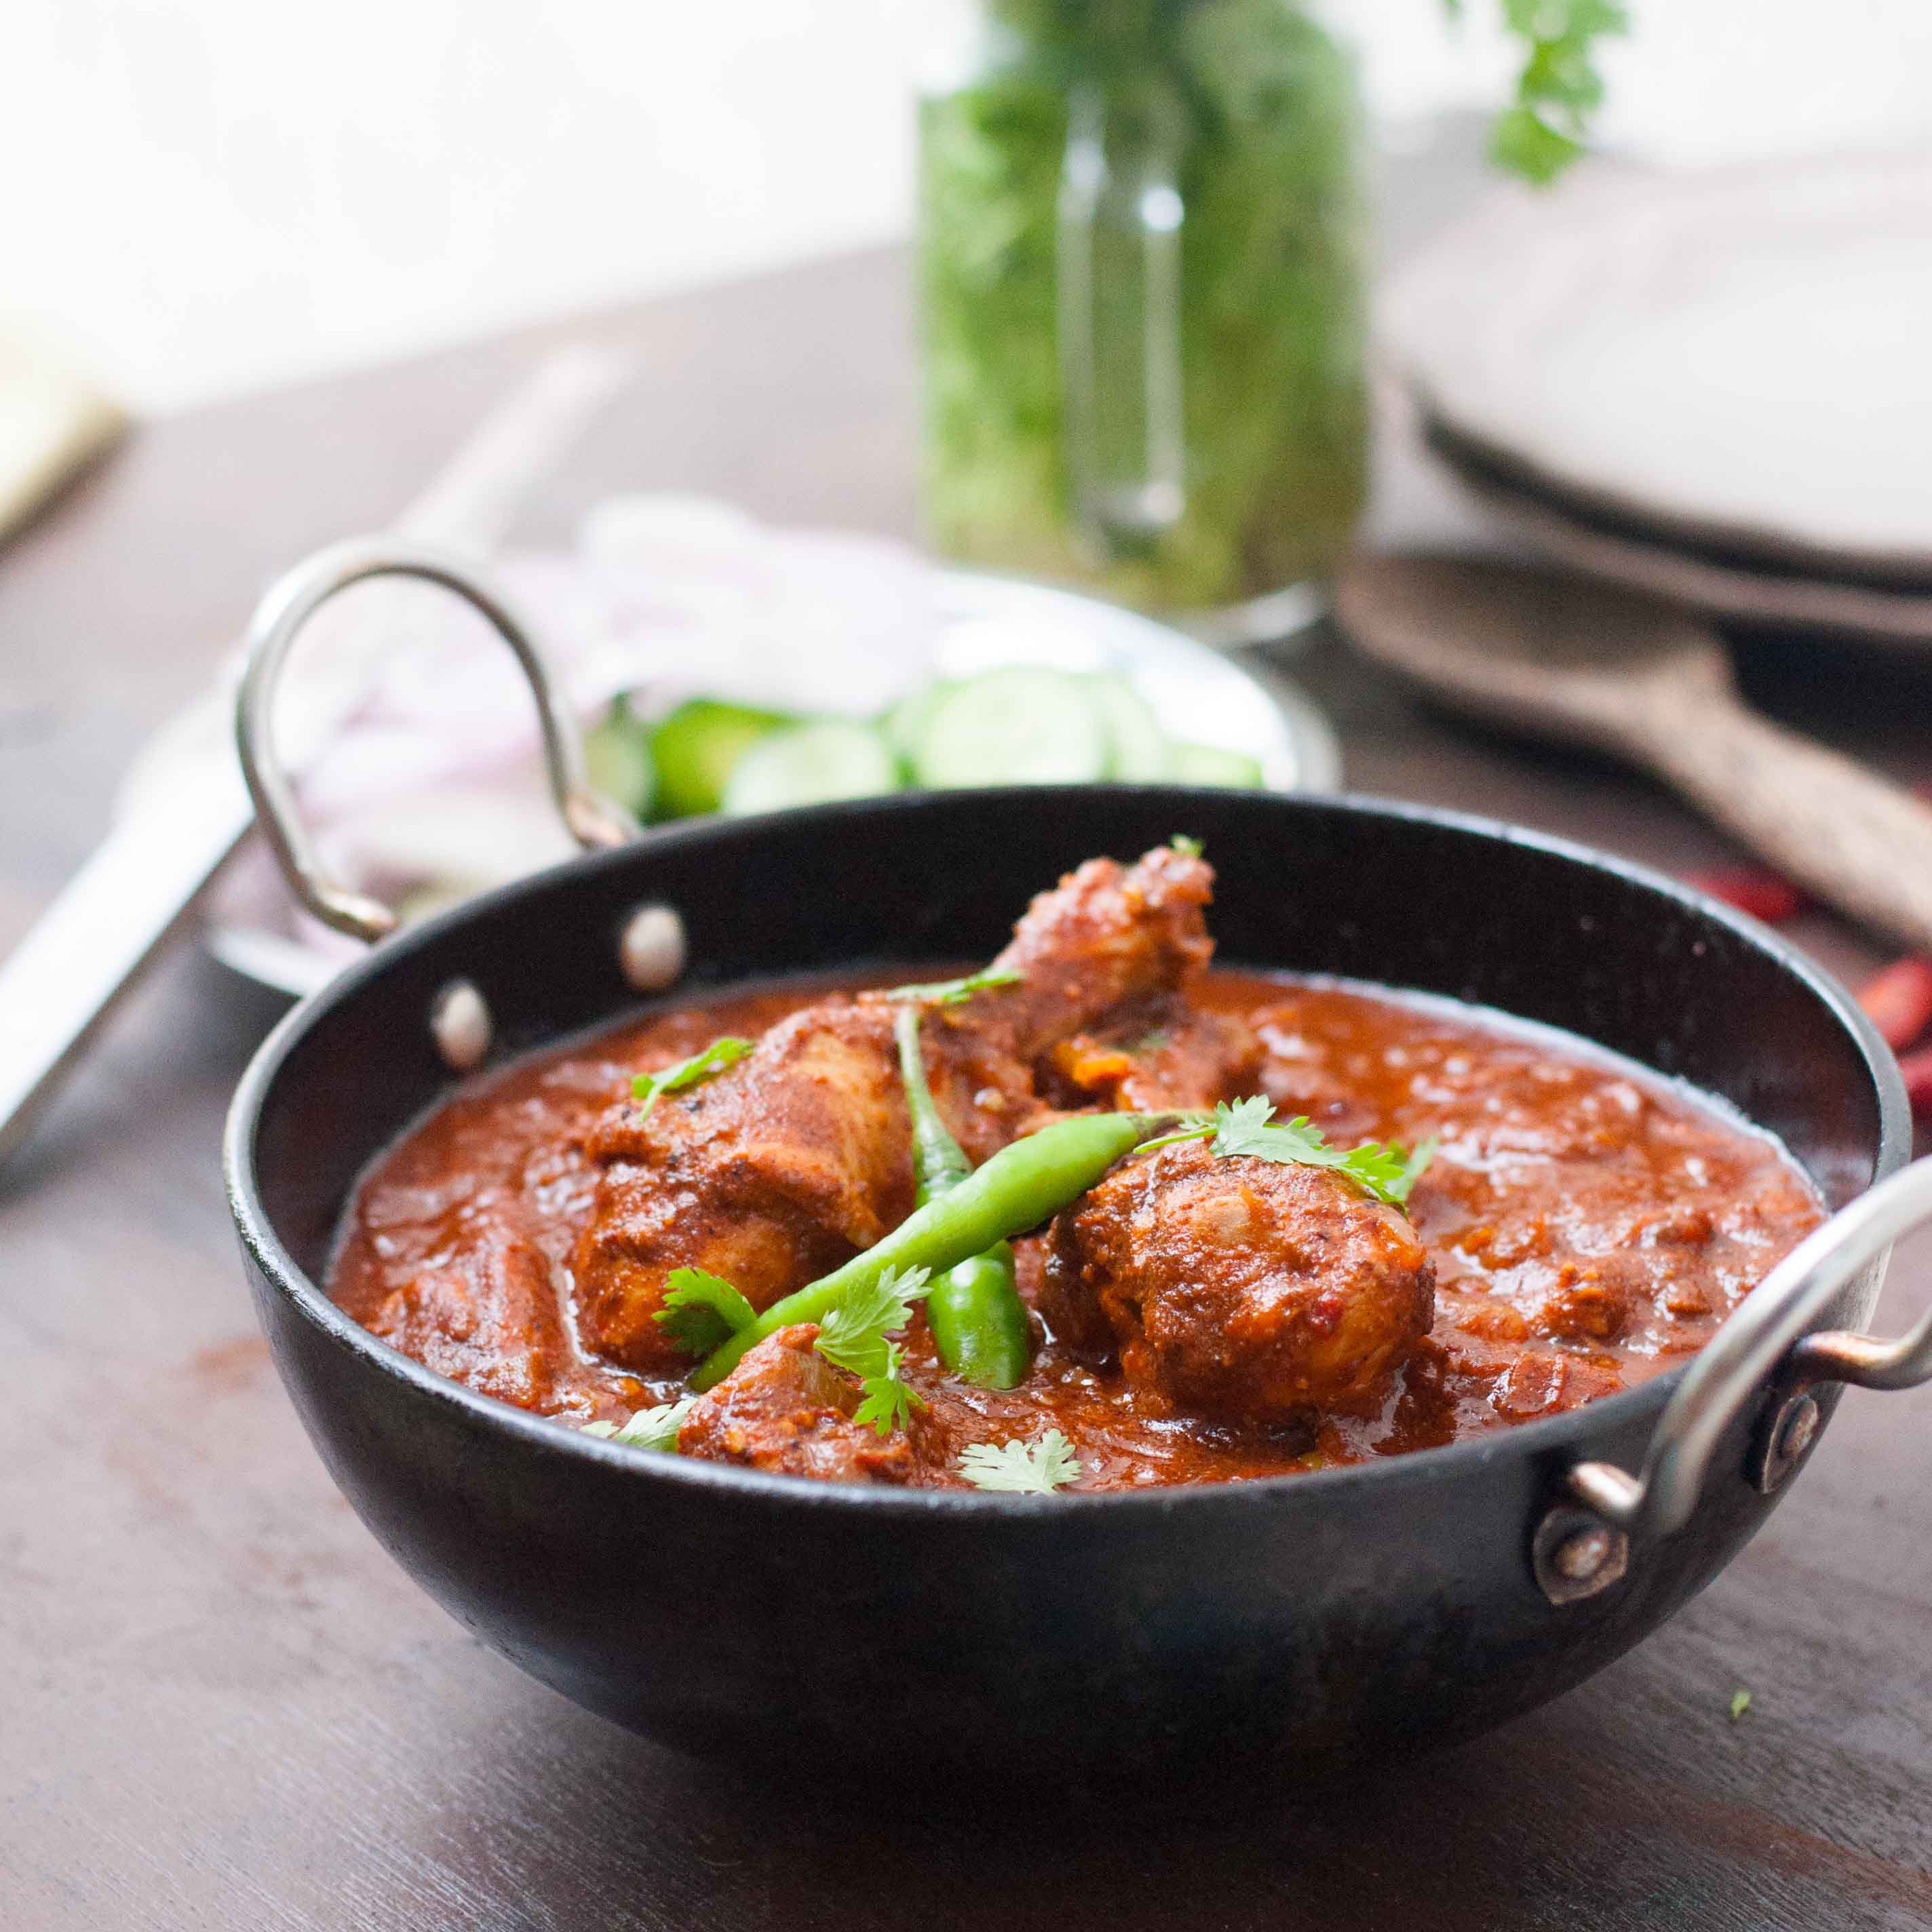 Authentic Goan Chicken Vindaloo Recipe- with Step by Step Video